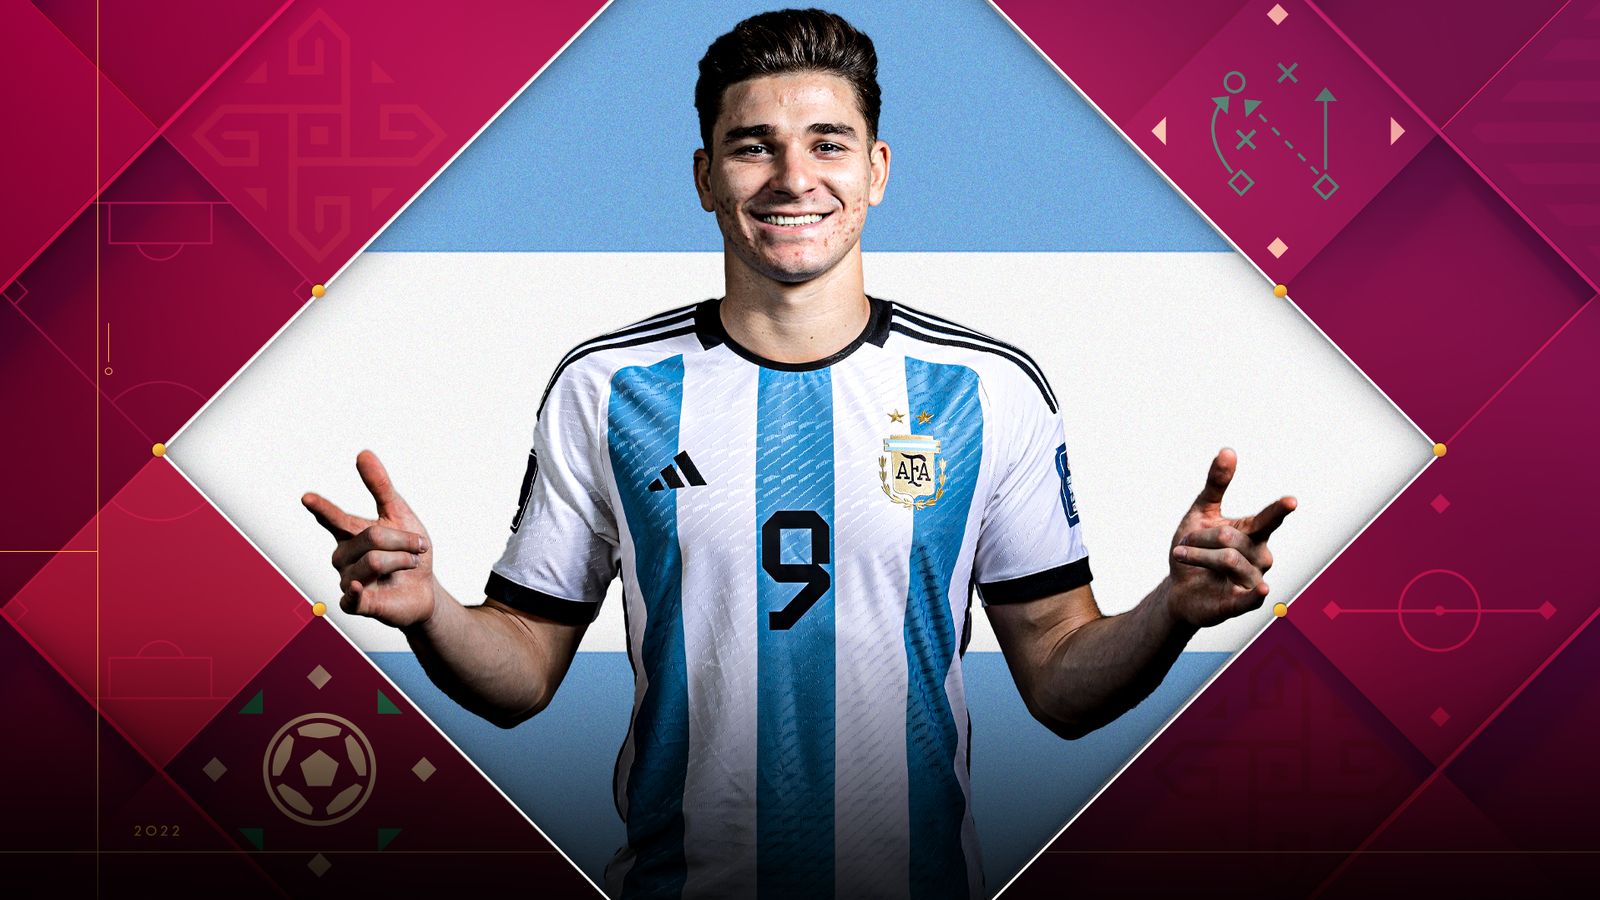 Julian Alvarez's perfect partnership with Lionel Messi has been key to Argentina's success in reaching the World Cup final